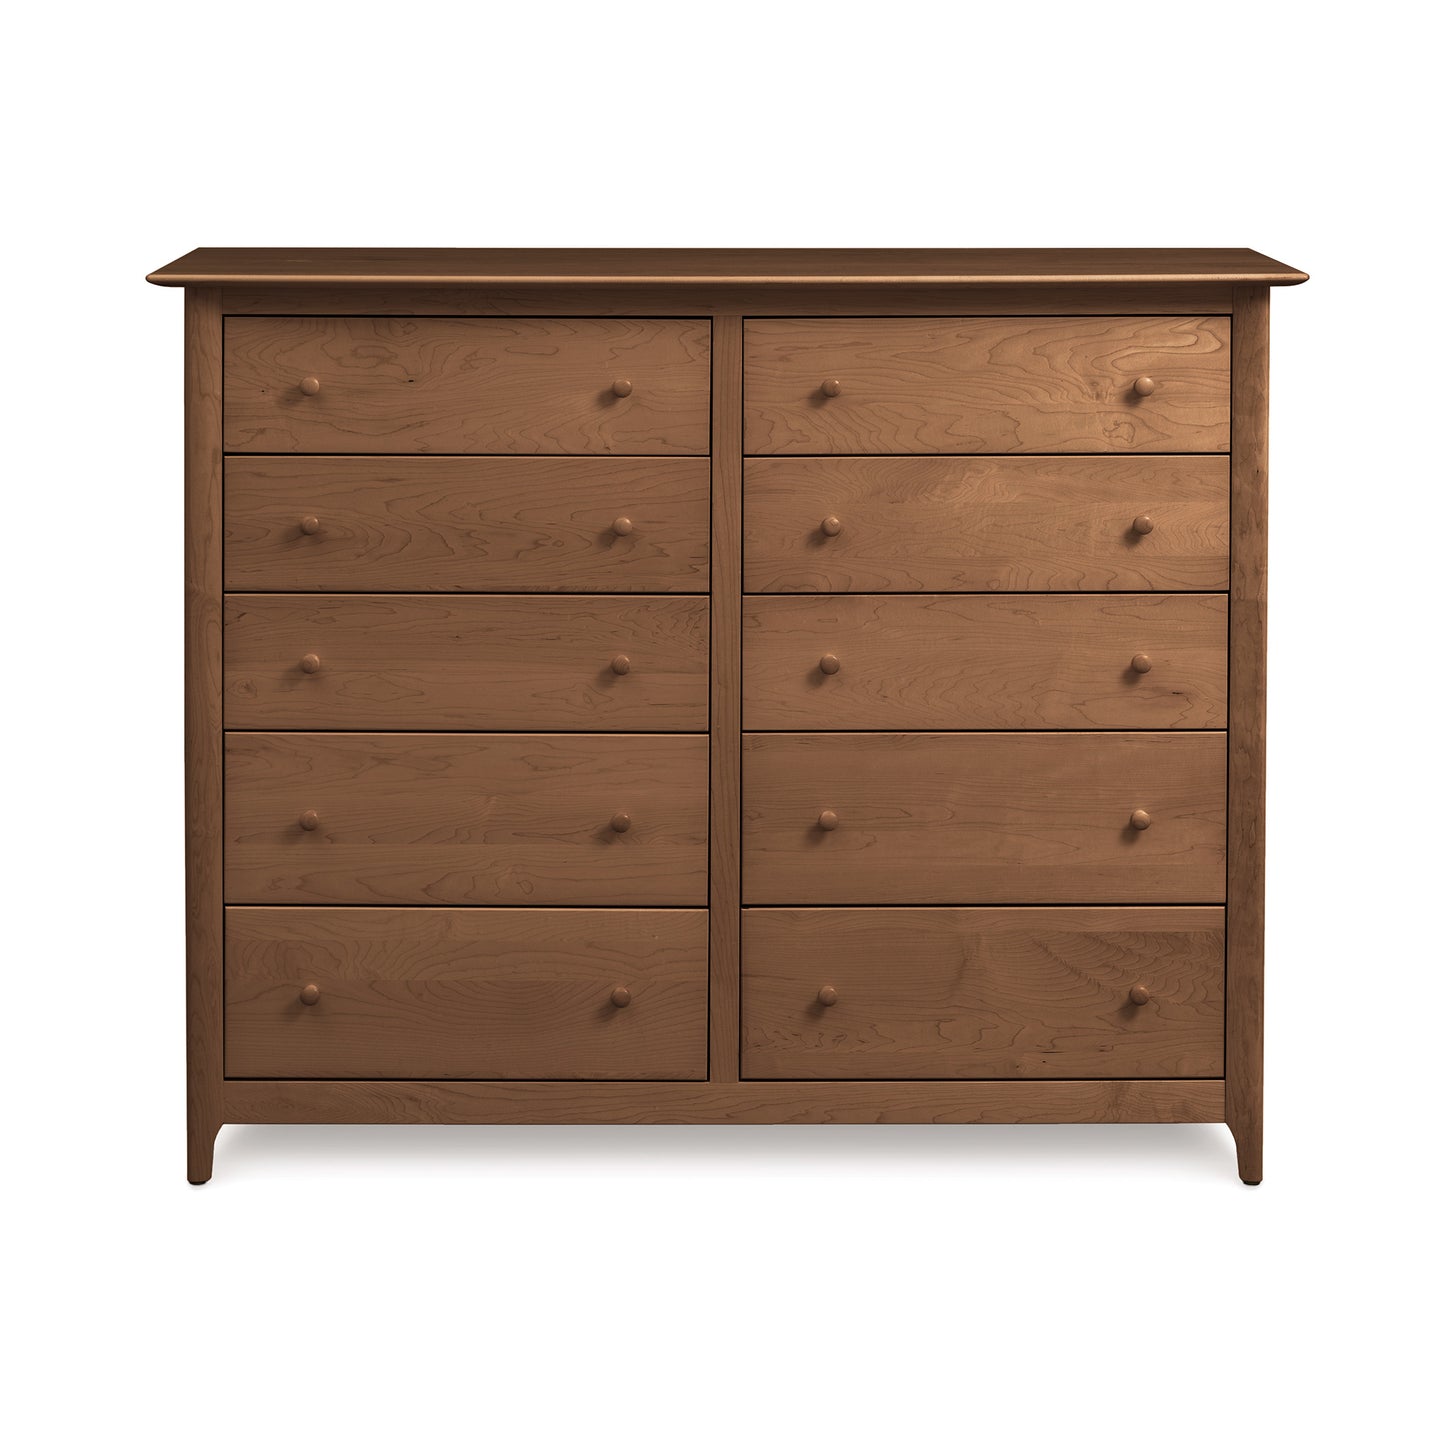 An eco-friendly Sarah 10-Drawer Dresser with six drawers, three on each side, arranged in two vertical columns by Copeland Furniture.